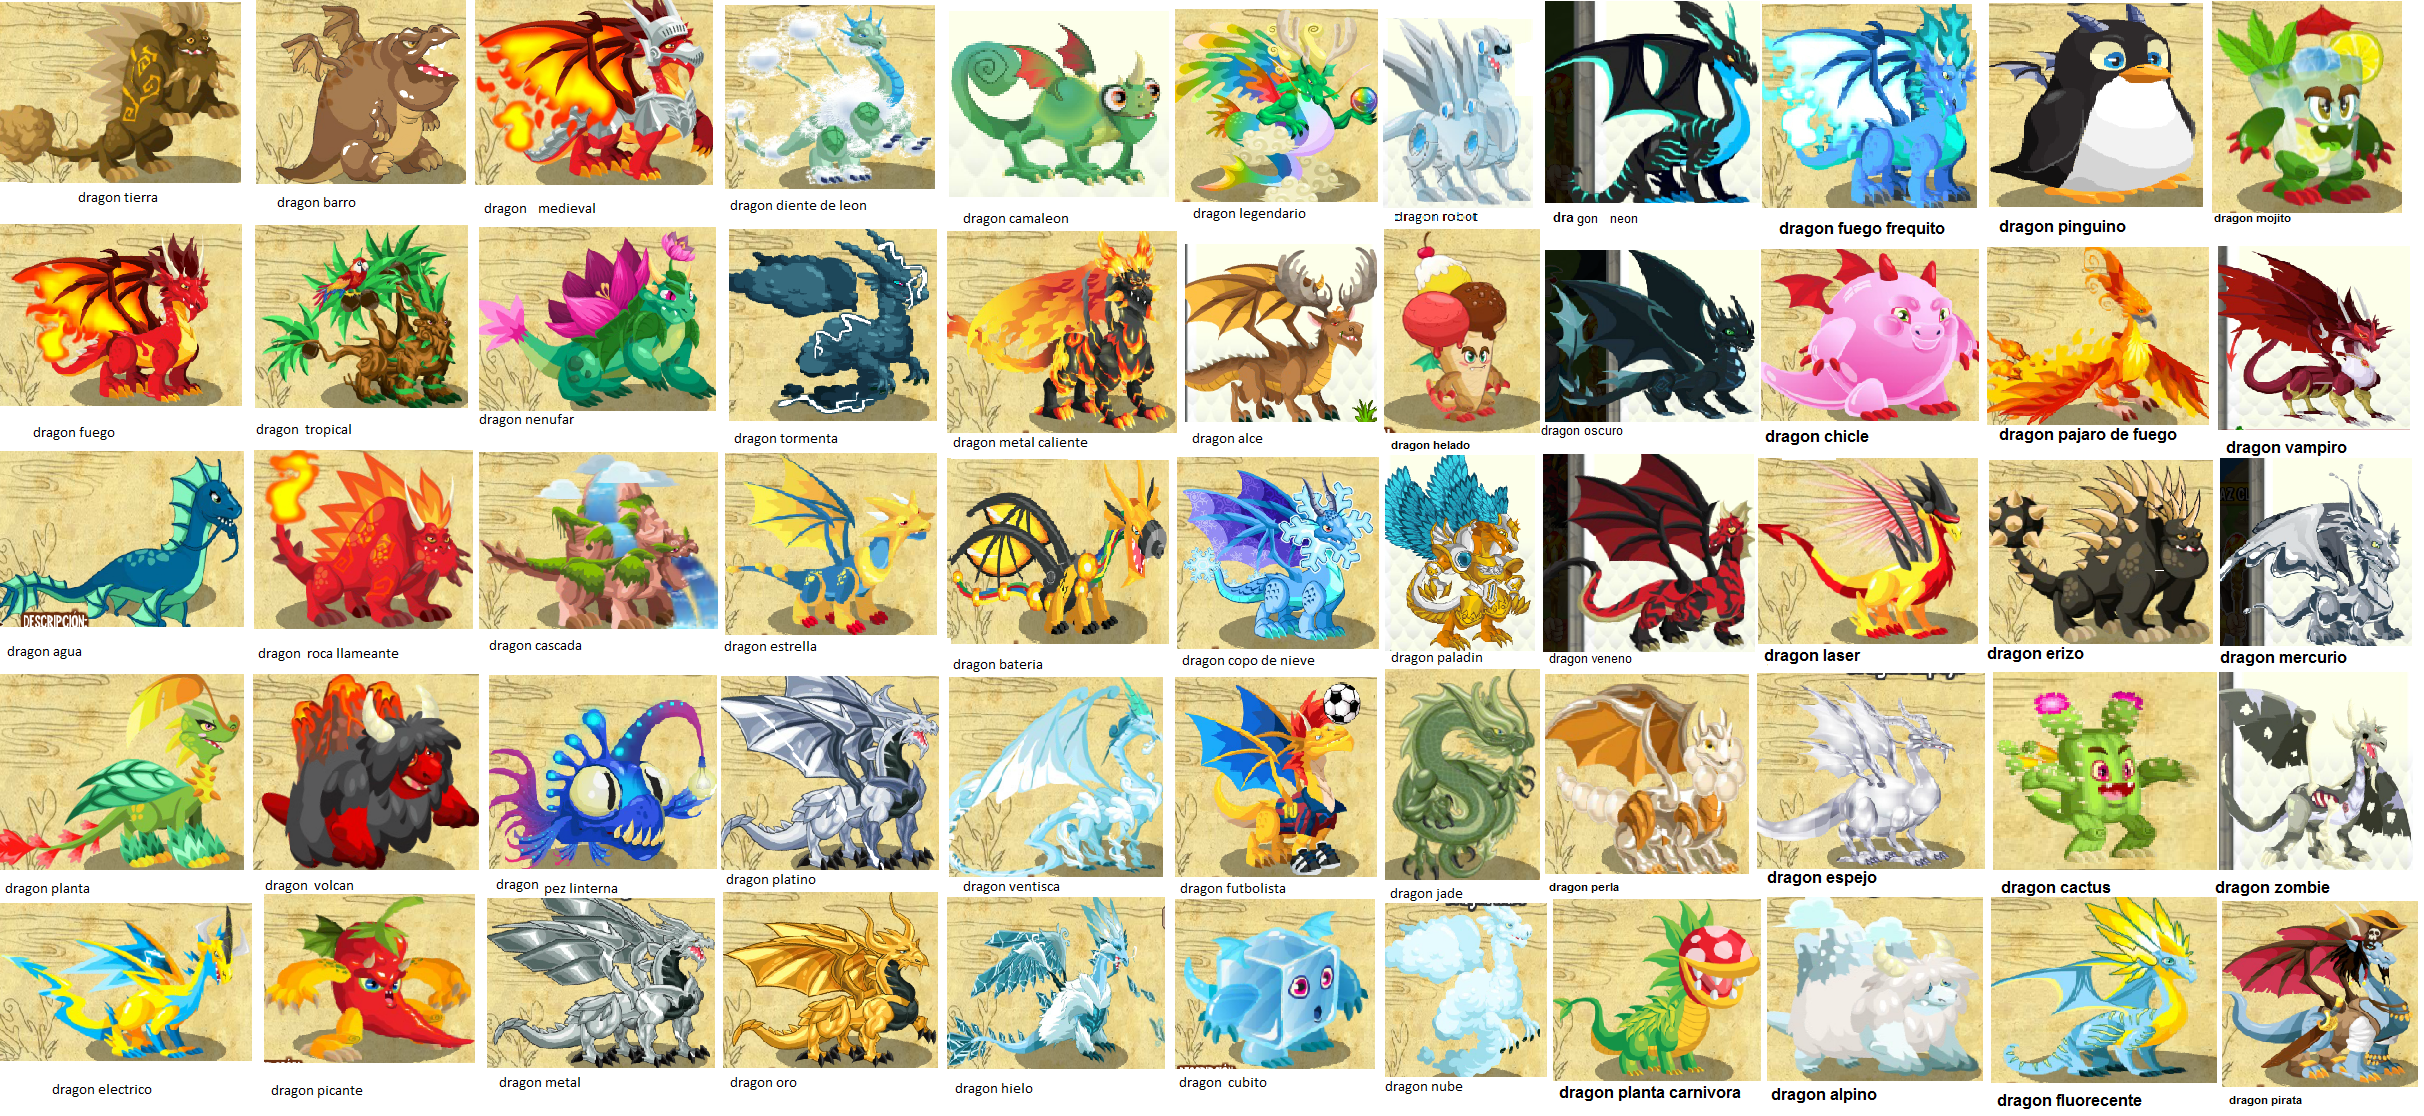 http://images1.wikia.nocookie.net/__cb20130127020103/dragoncity/images/9/99/Dragon_city_dragones.png